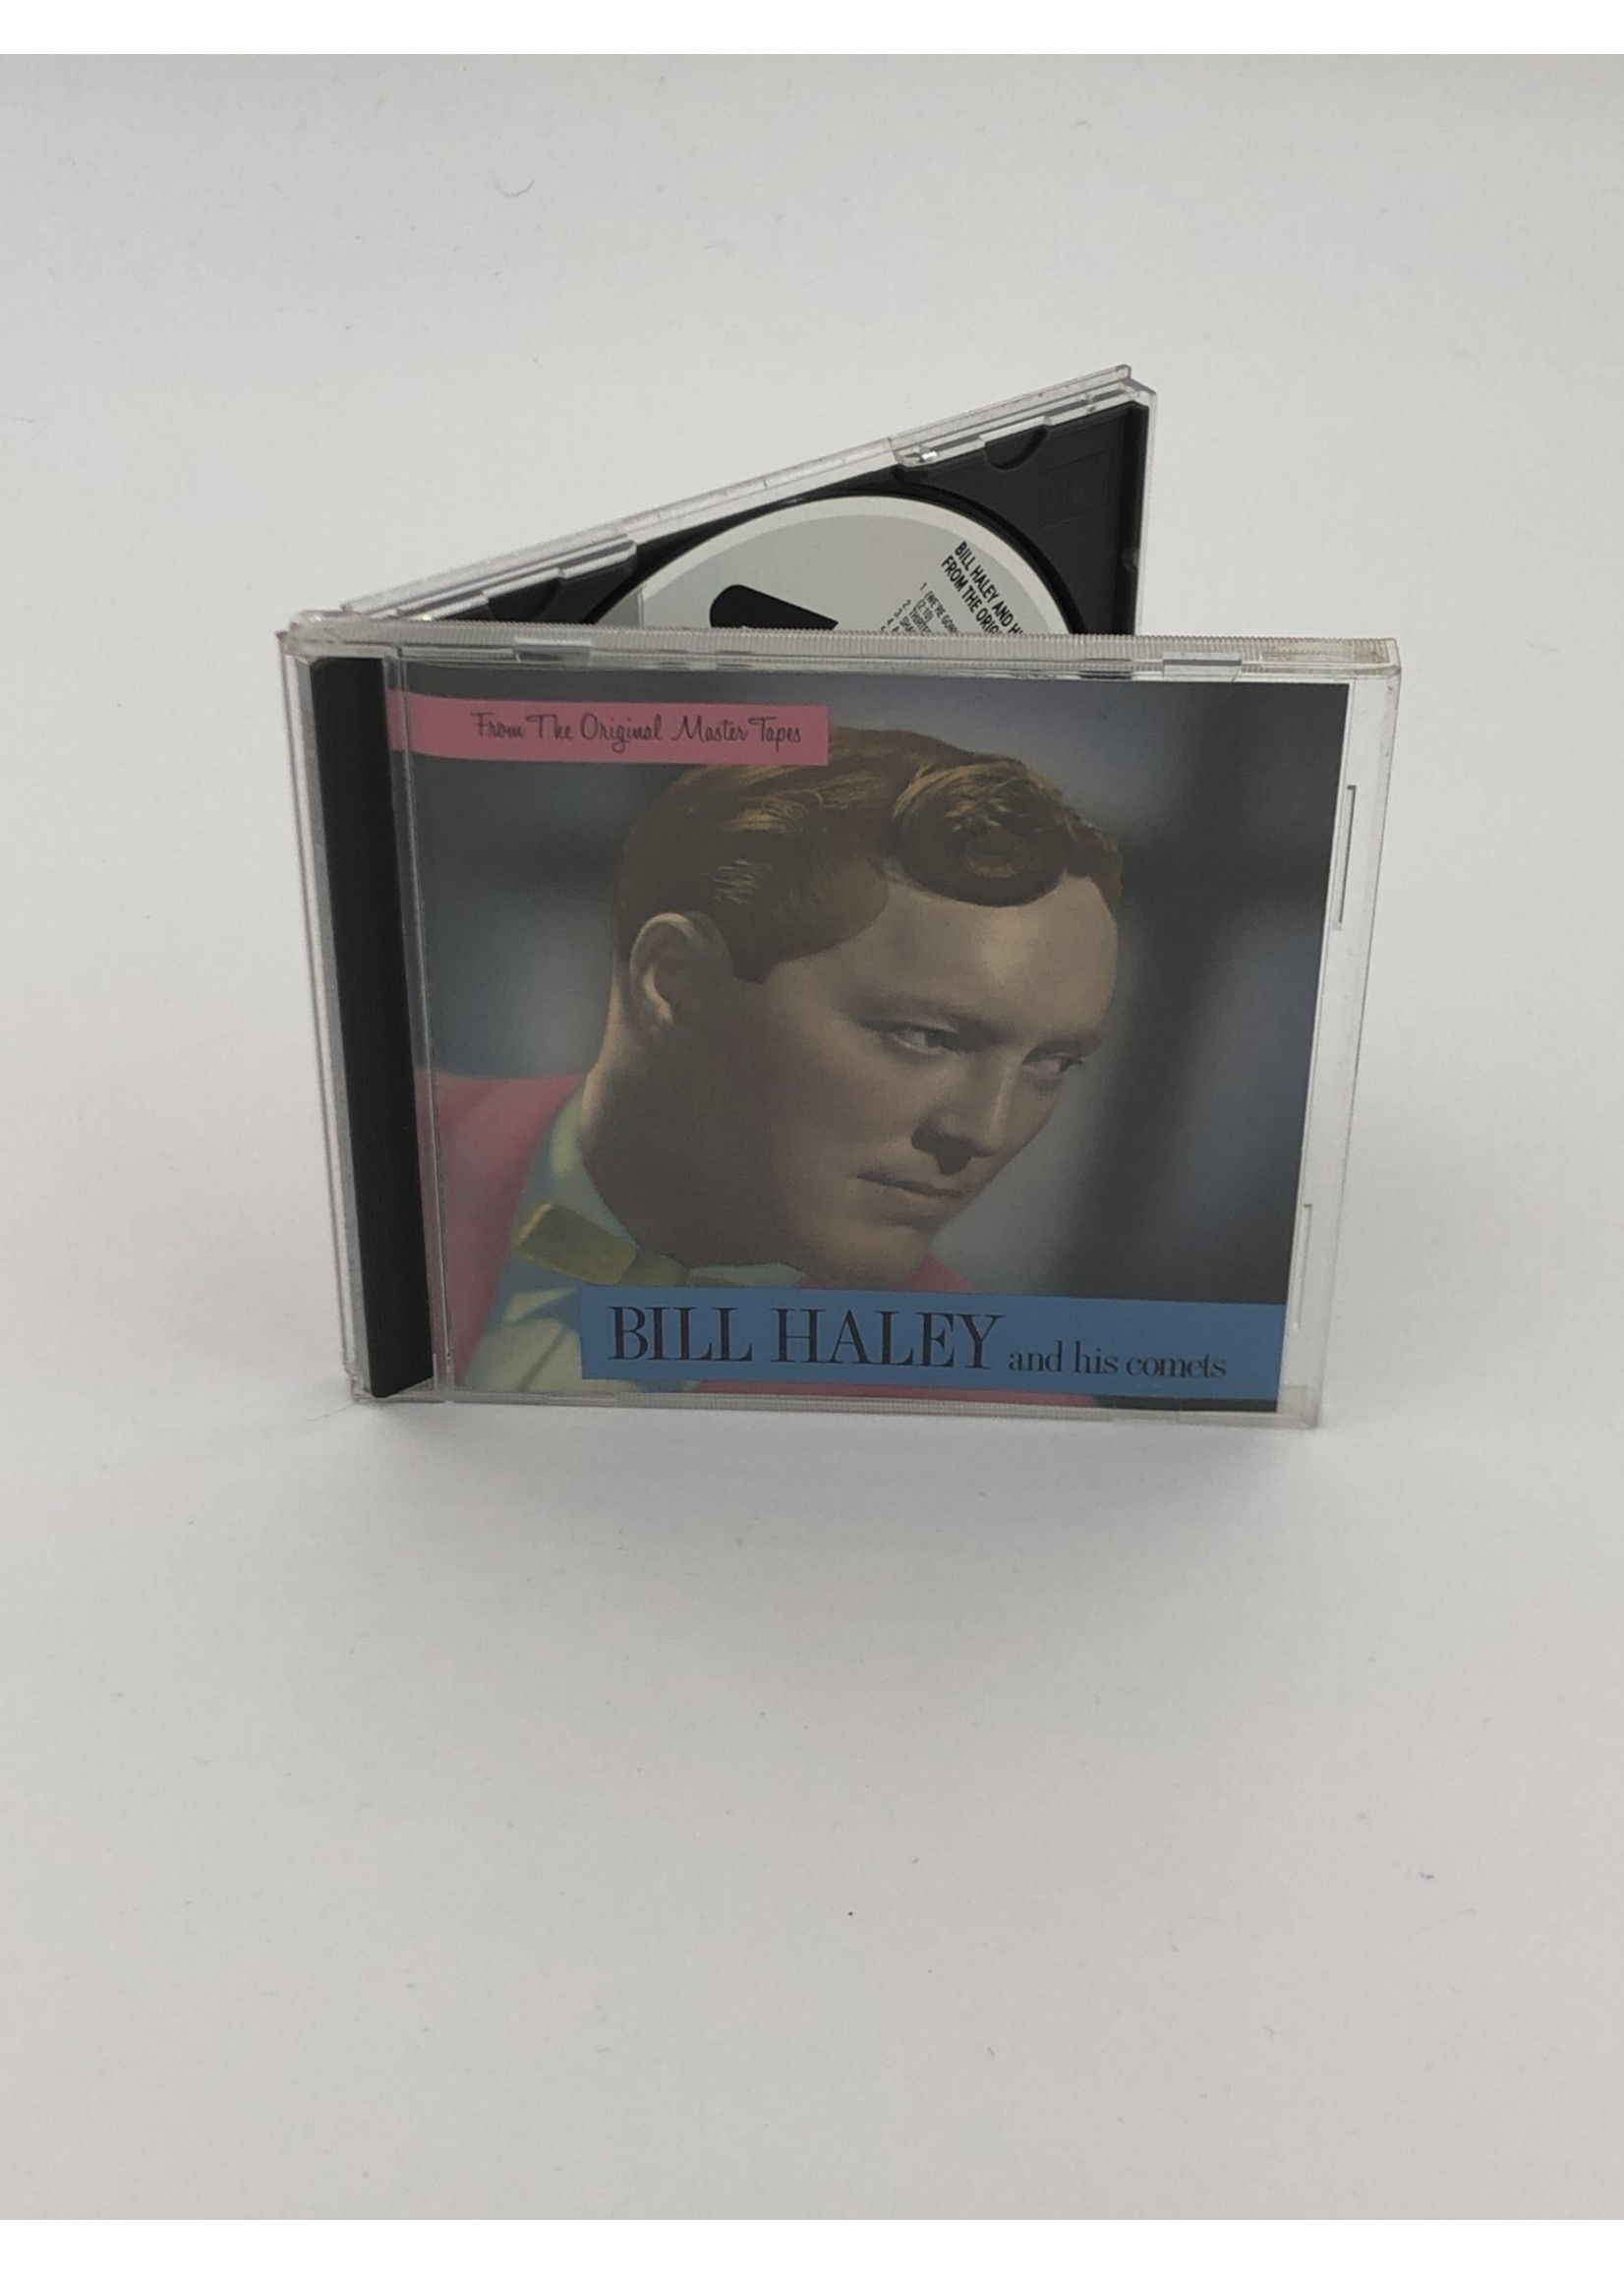 CD Bill Haley and His Comets: From the Original Master Tapes CD